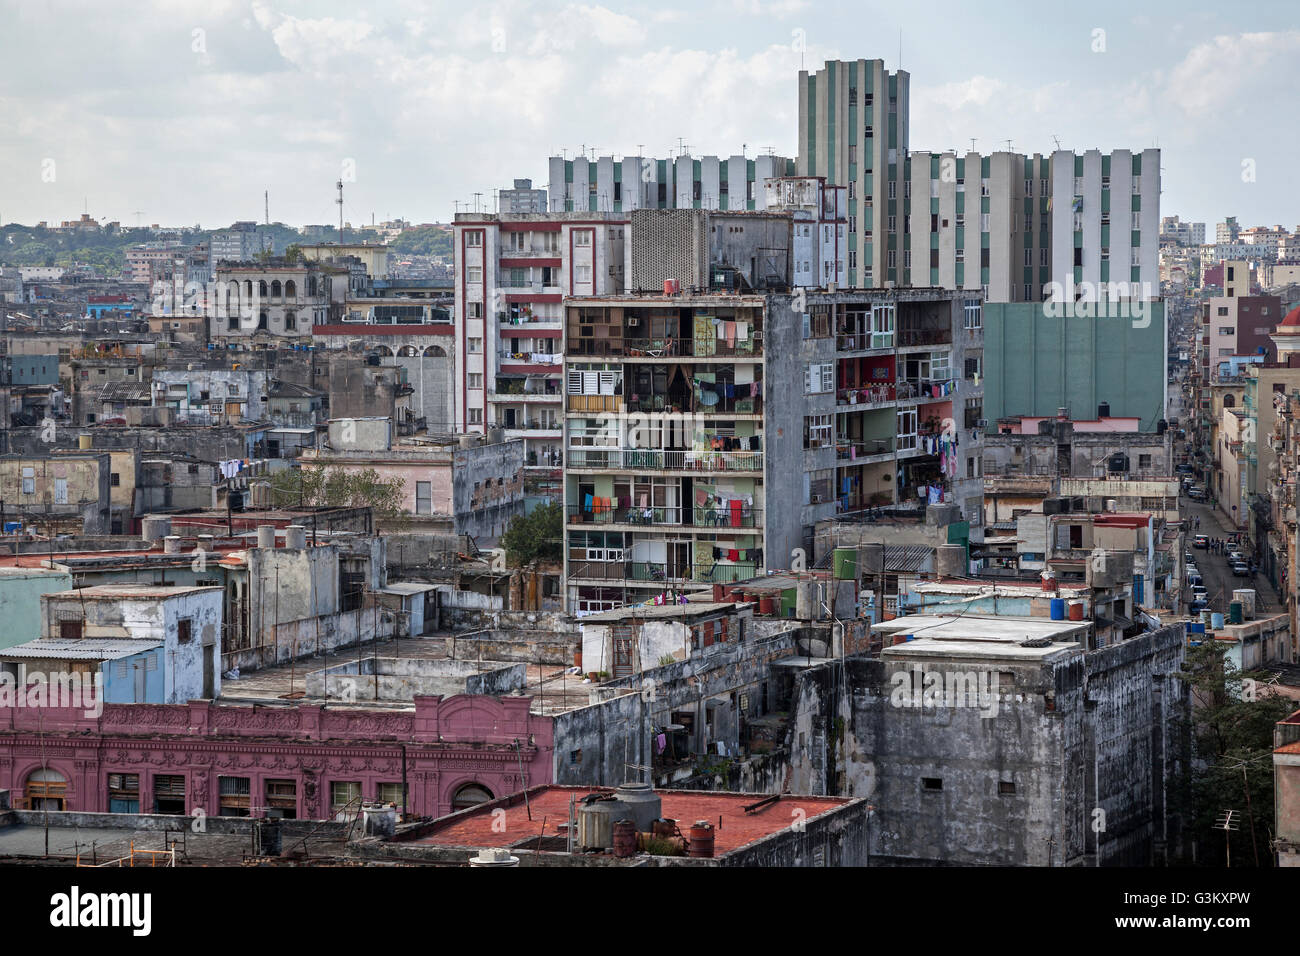 View of ramshackle houses and rooves in city centre, Havana, Cuba Stock Photo